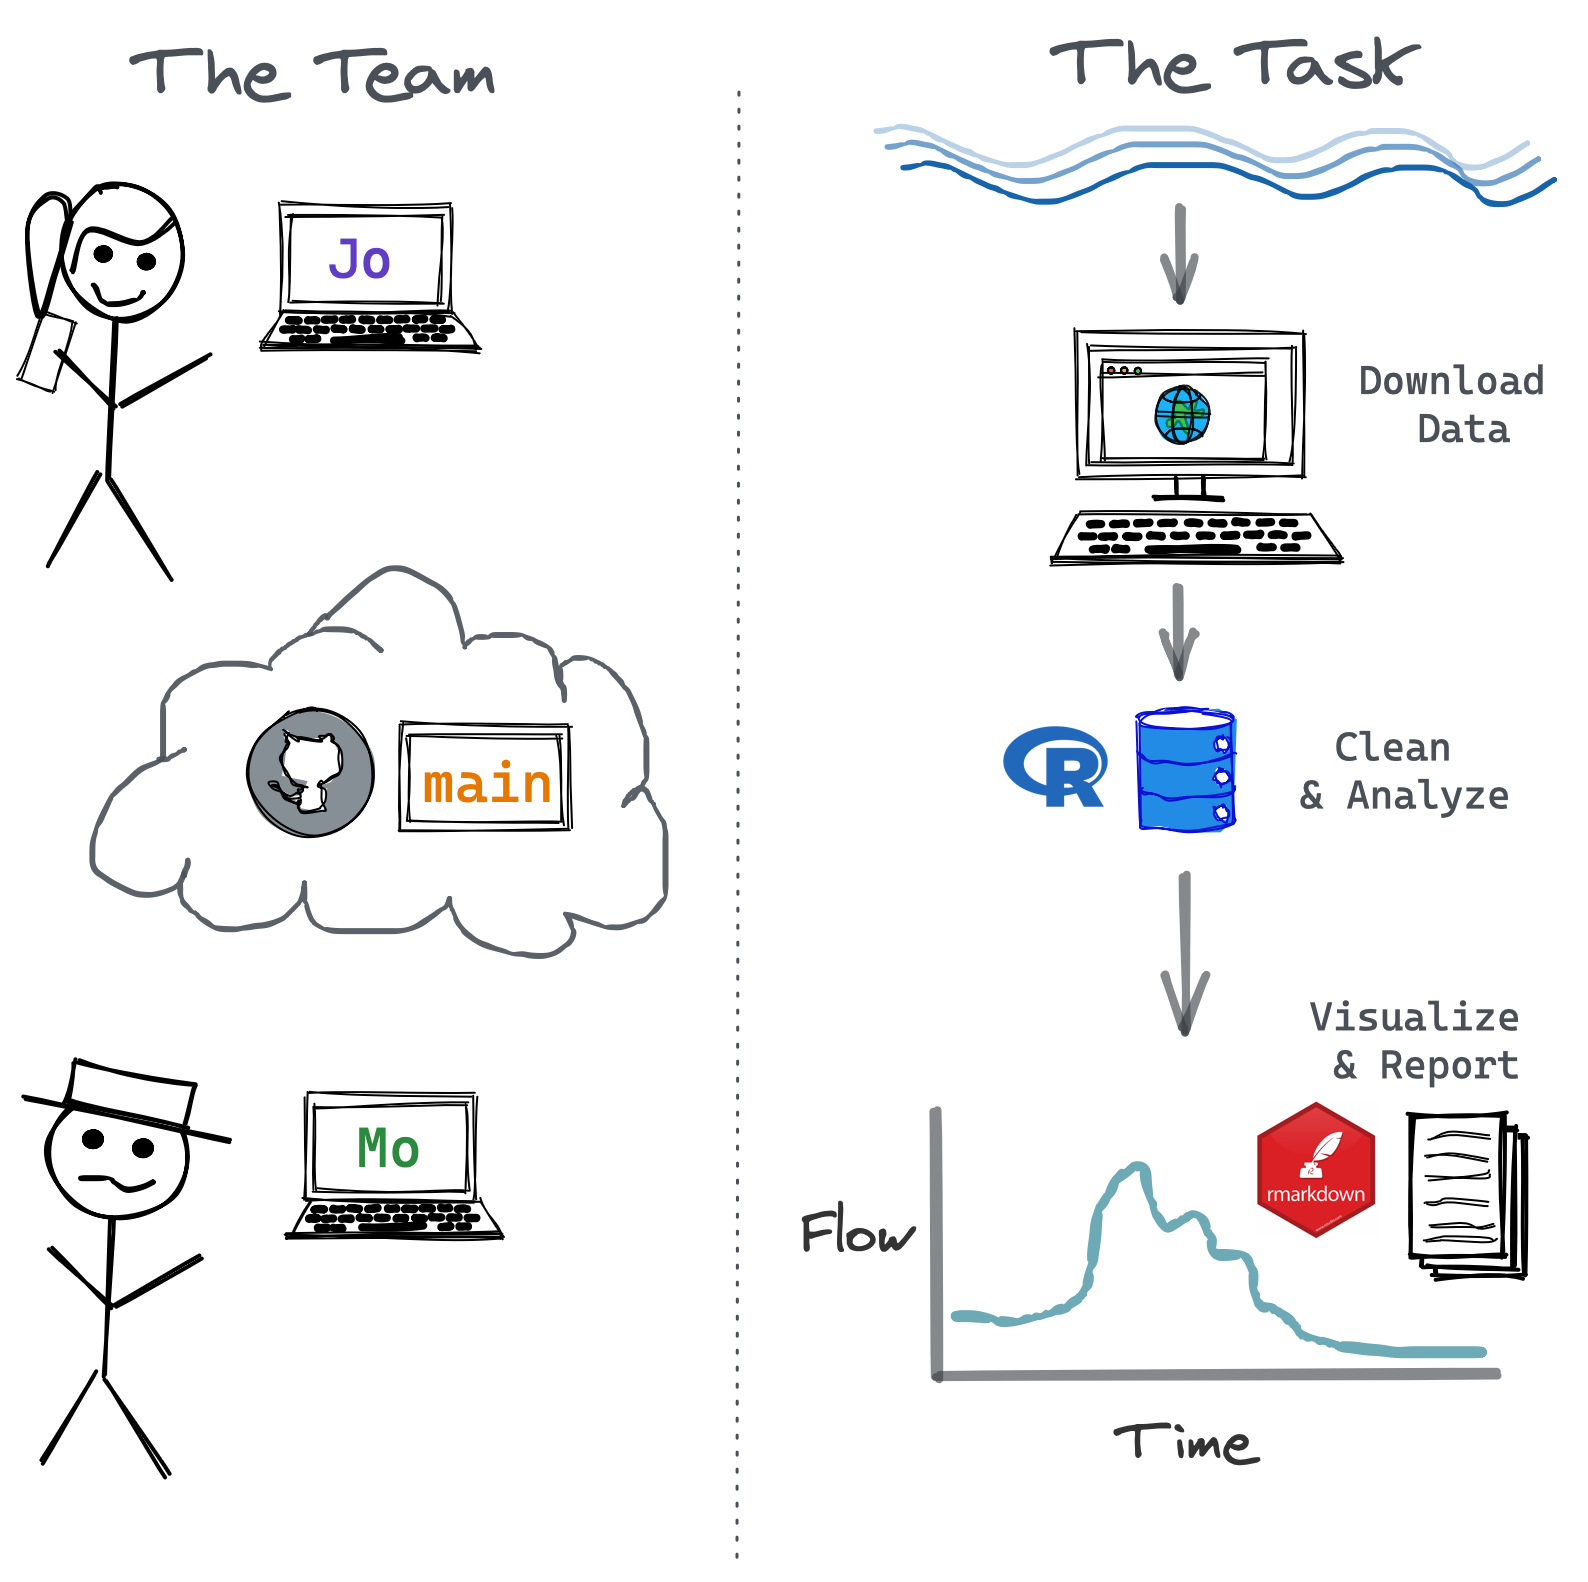 An example team and workflow.